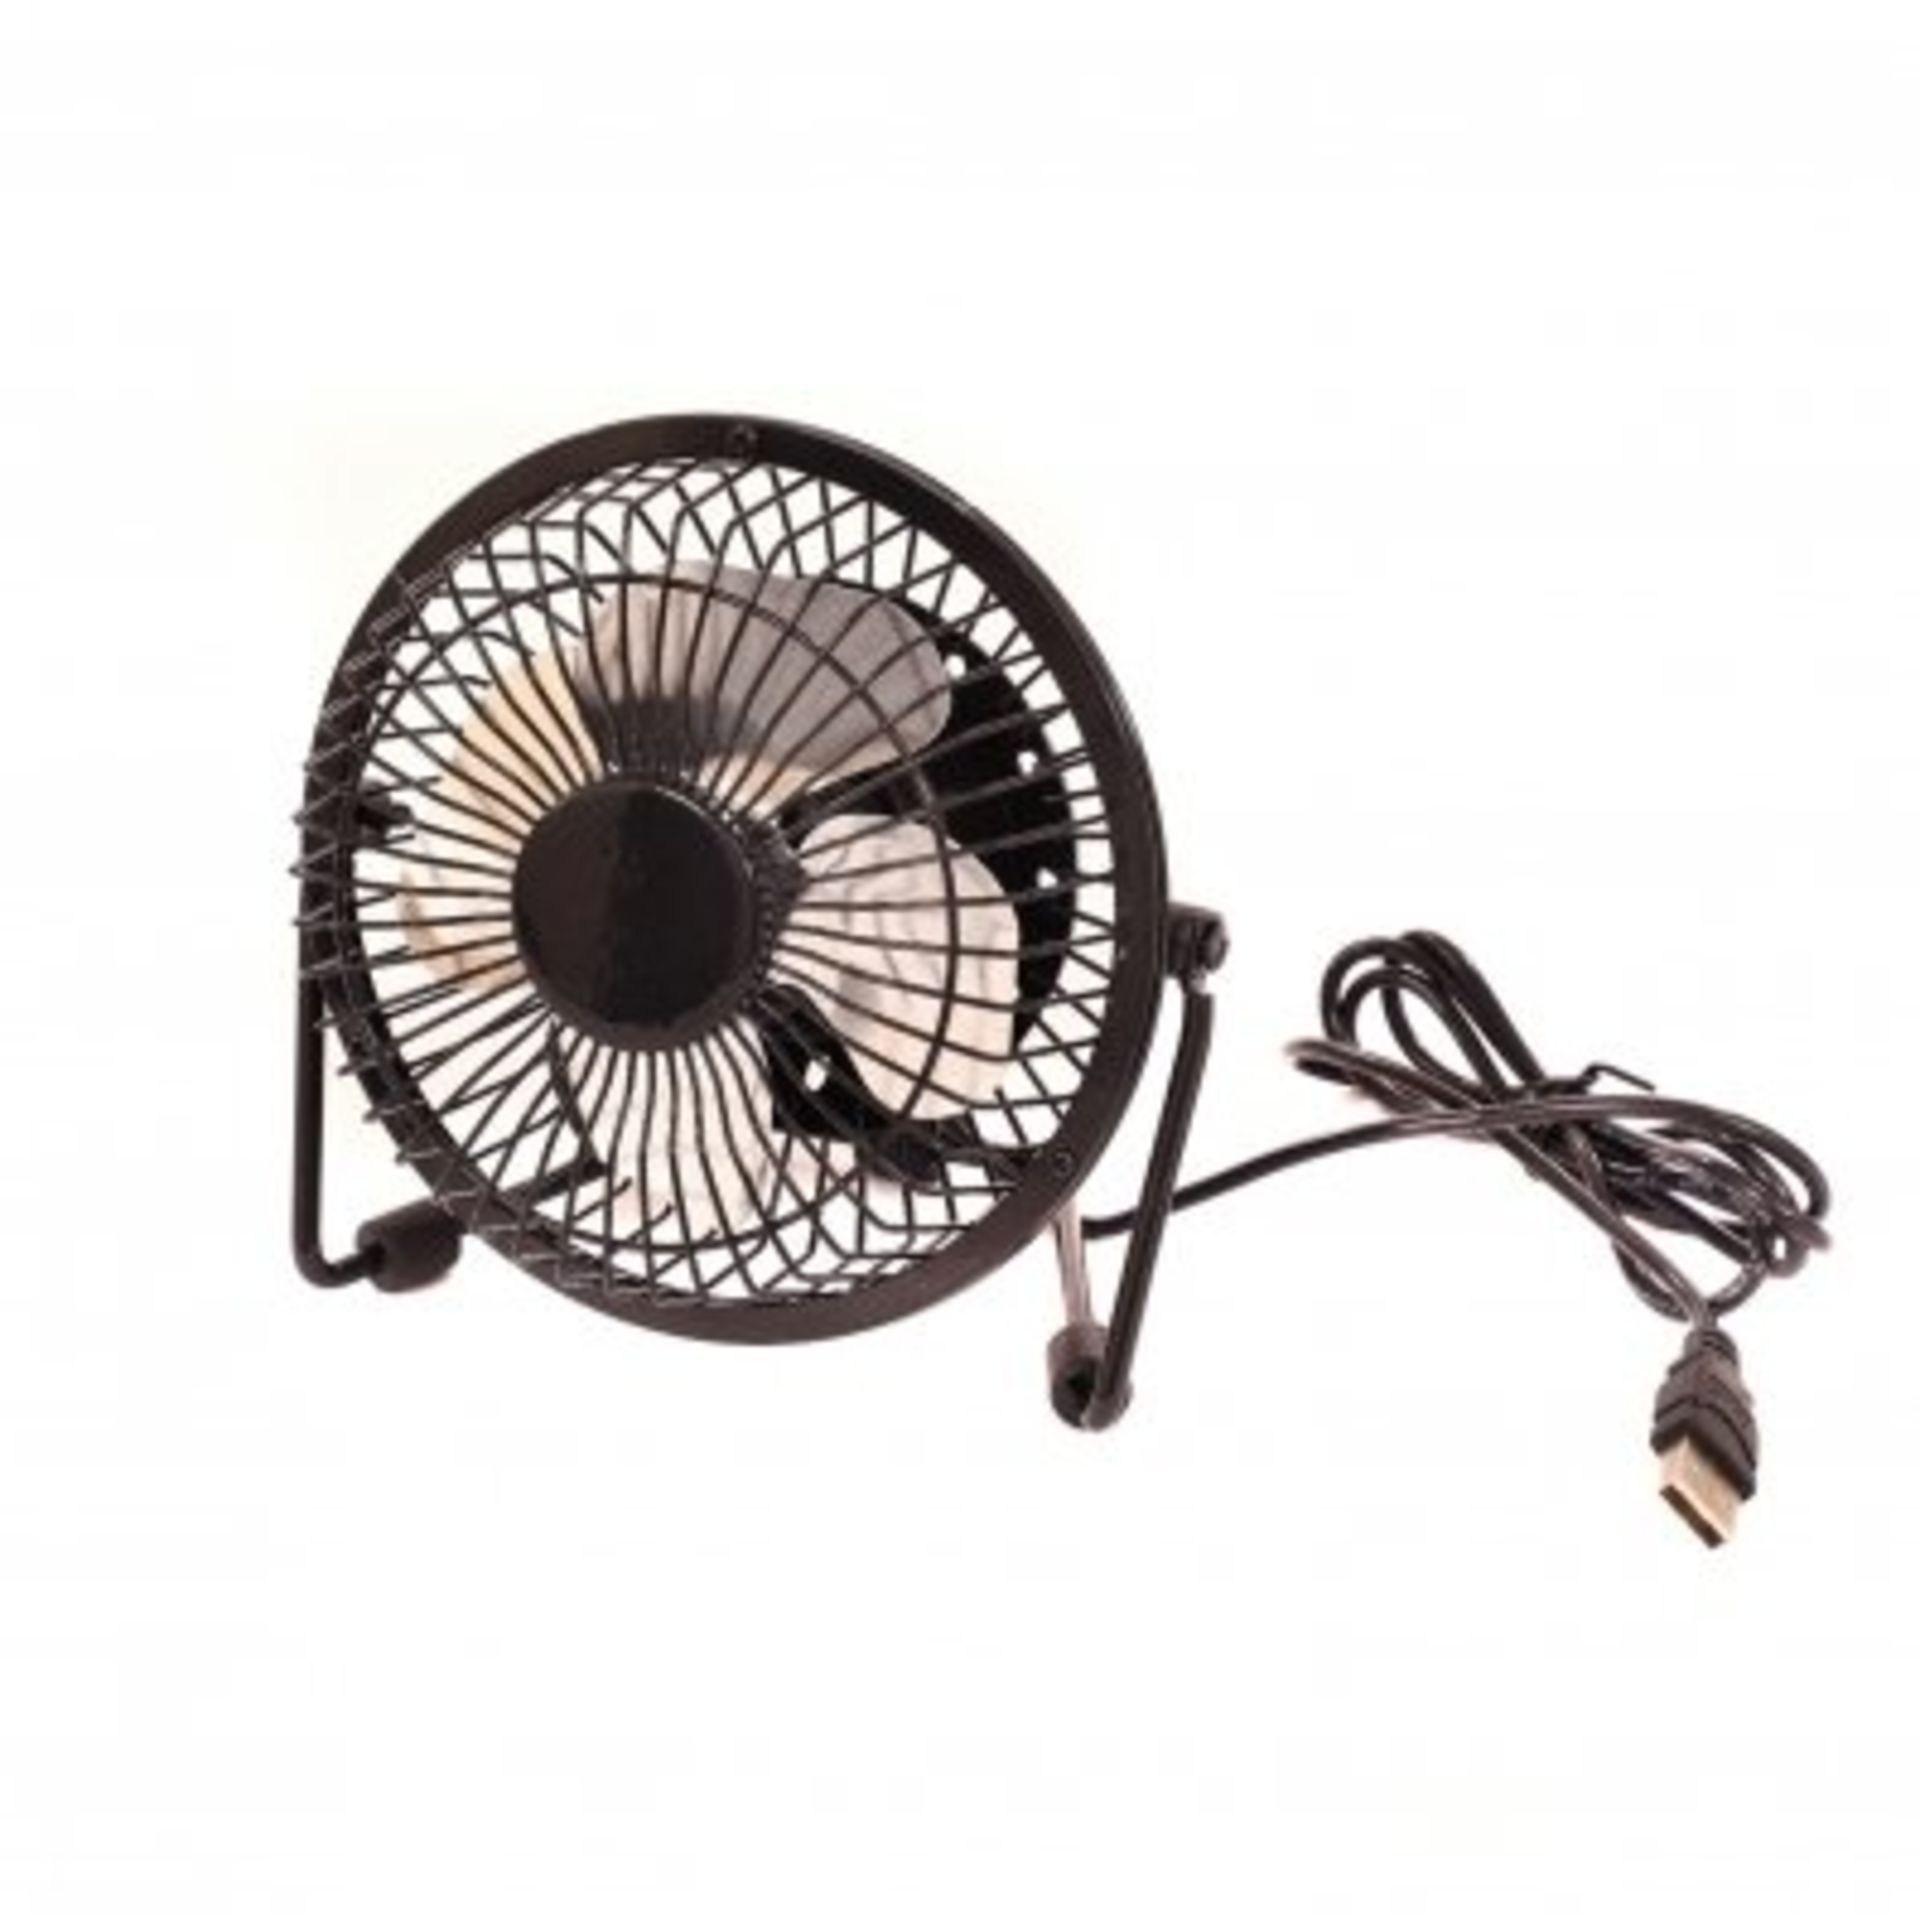 (KK236) 4" Free Standing Black USB Desk Top Table Home Office Fan Stay cool this year wit...